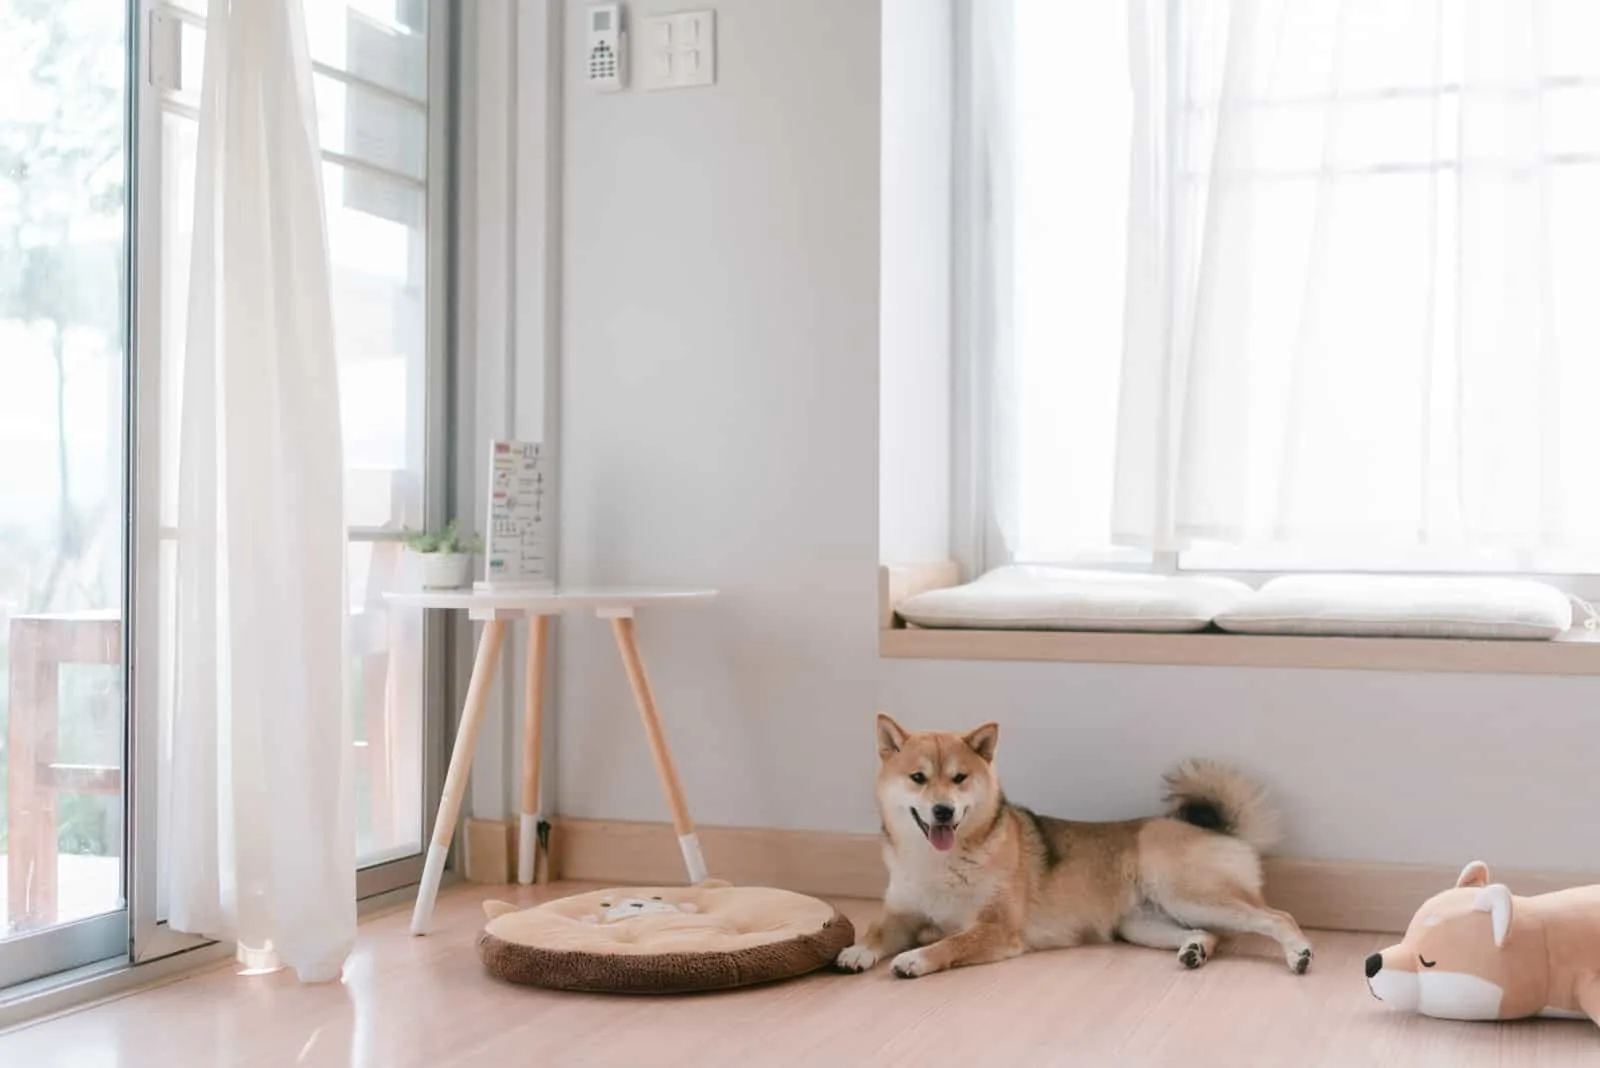 Shiba Inu lies and rests on the floor